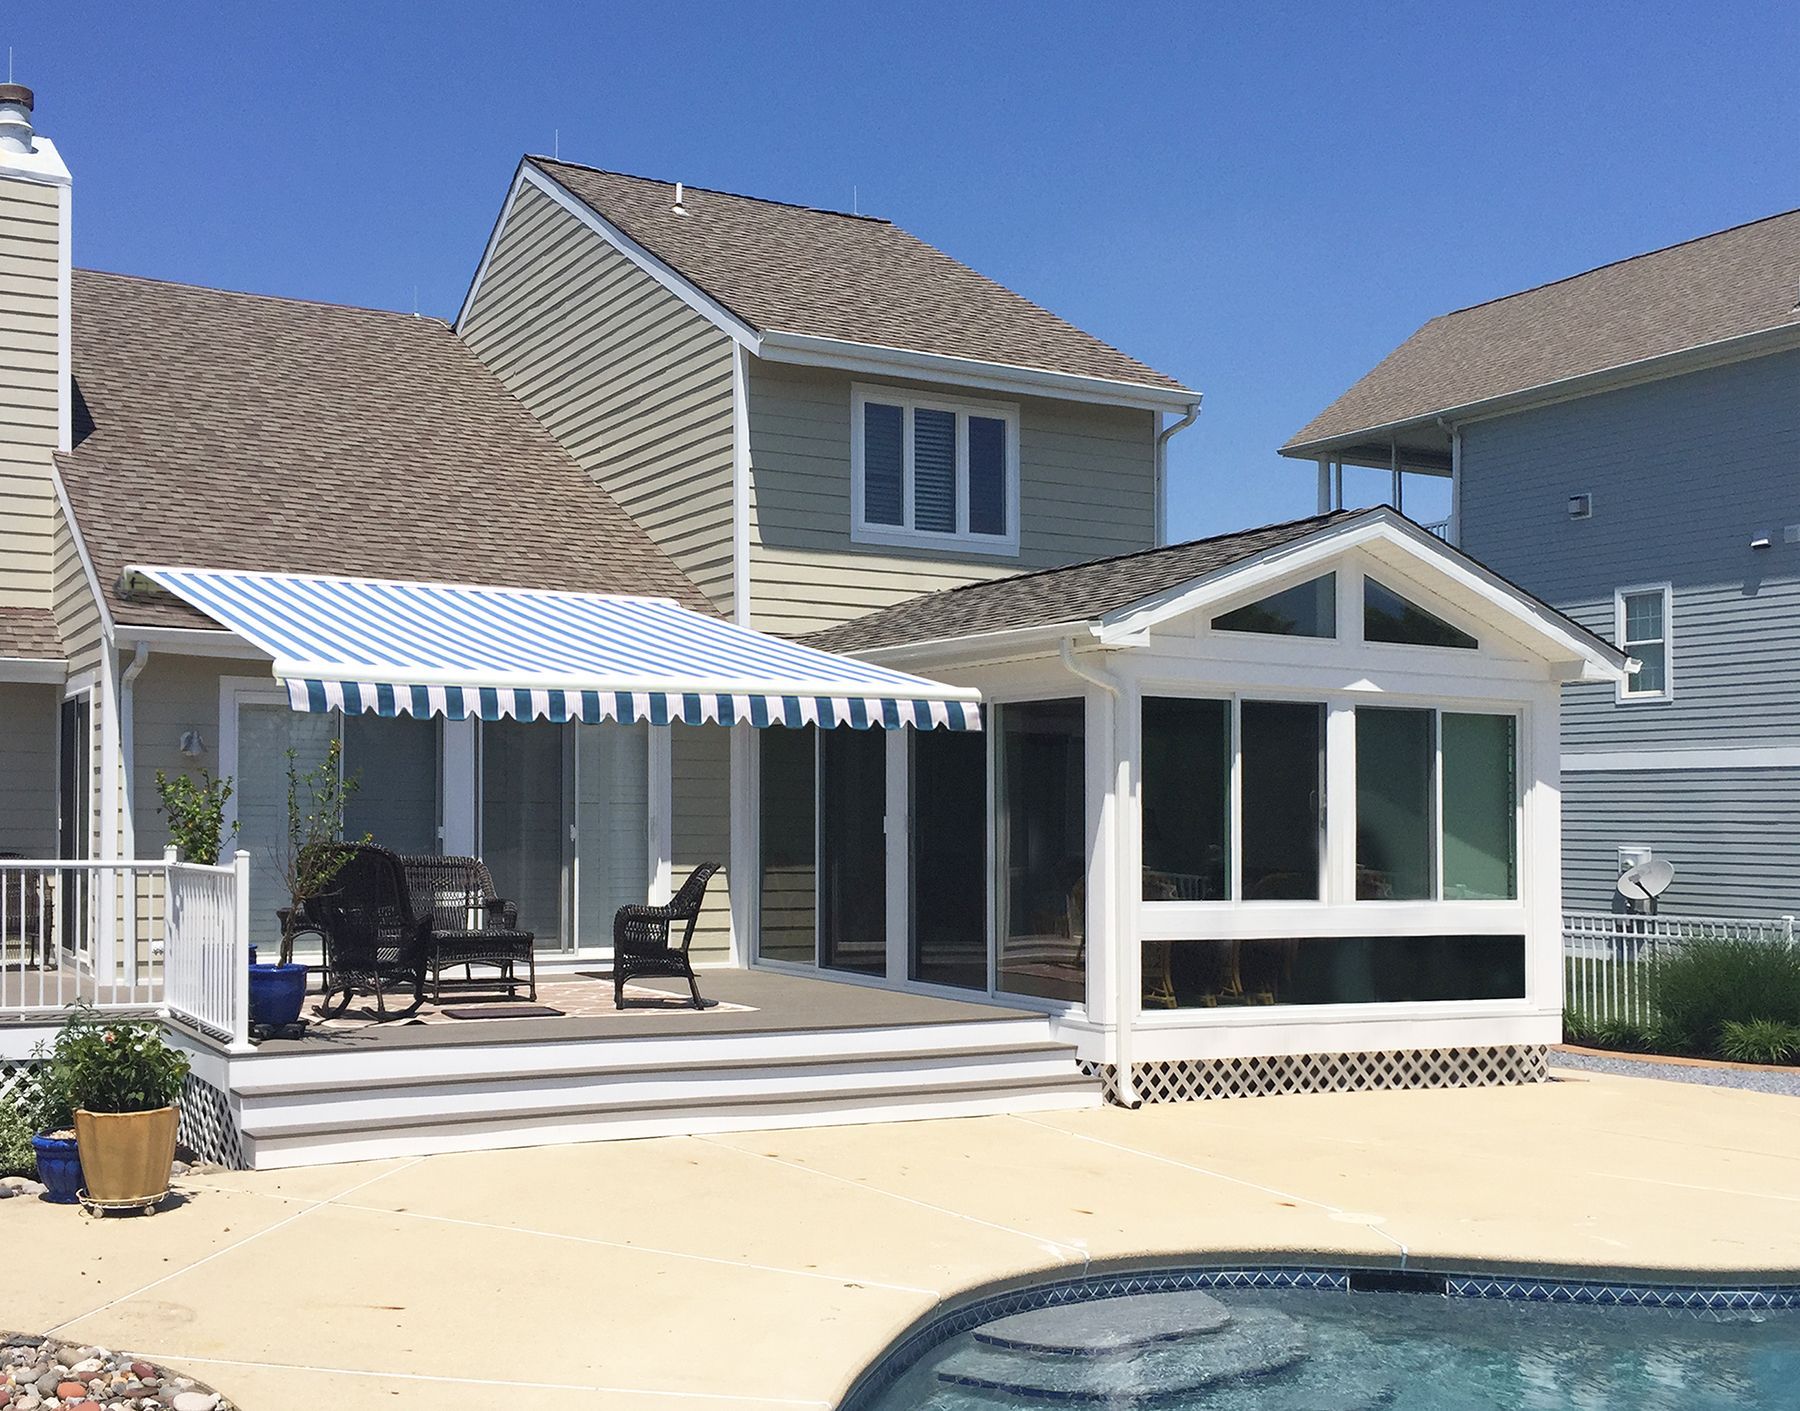 A house with a swimming pool and a blue and white awning